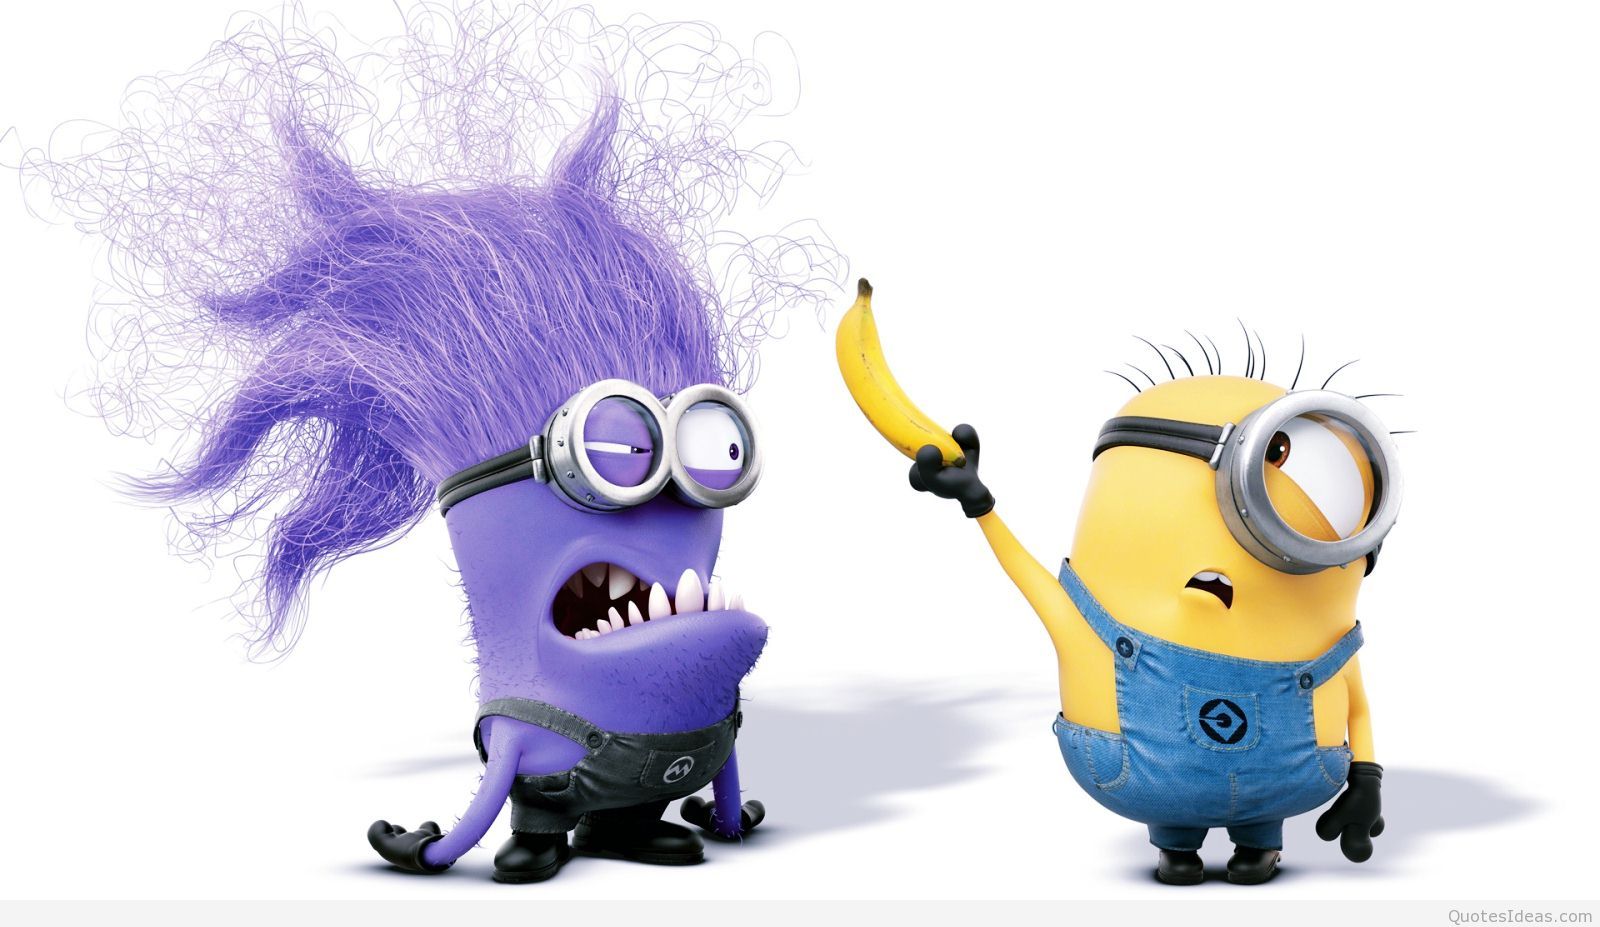 Amazing Minions Wallpaper And Mobile